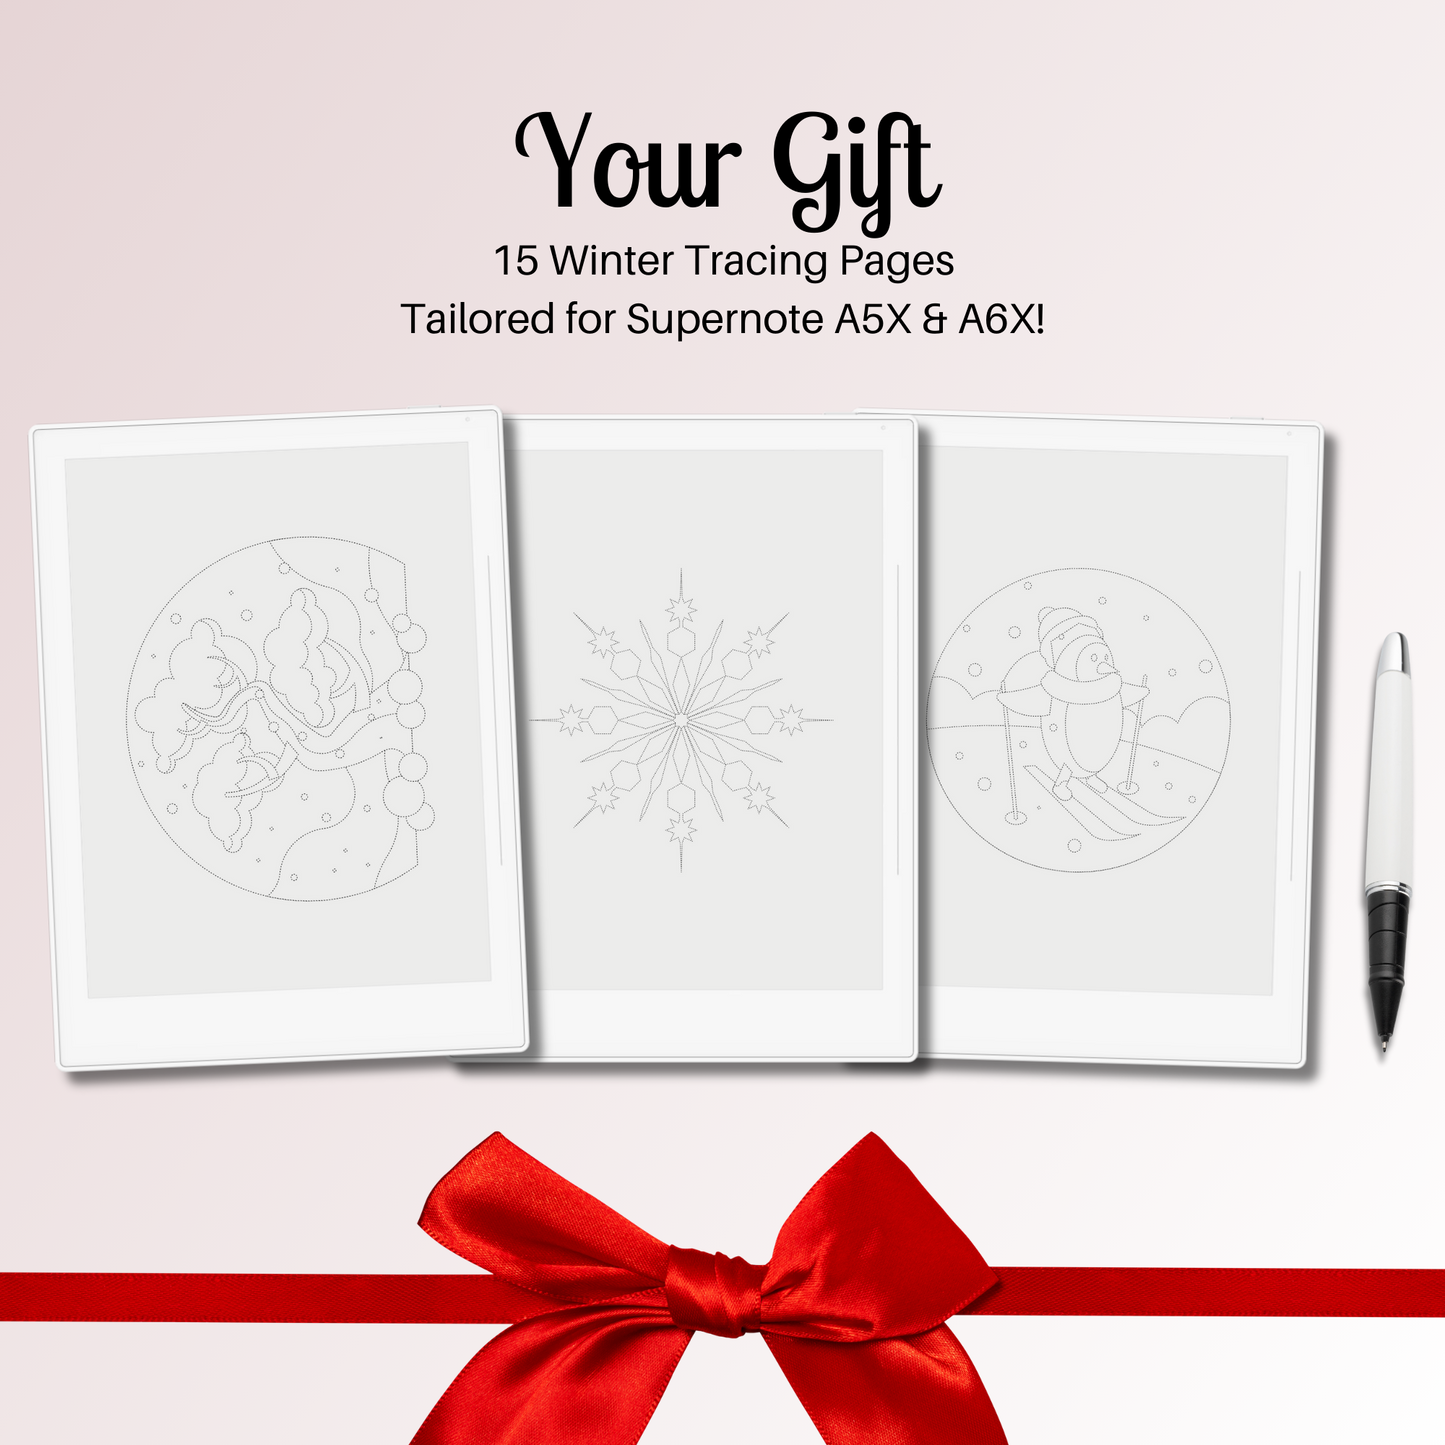 Supernote A5X and A6X Tracing Pages for Christmas as Gift